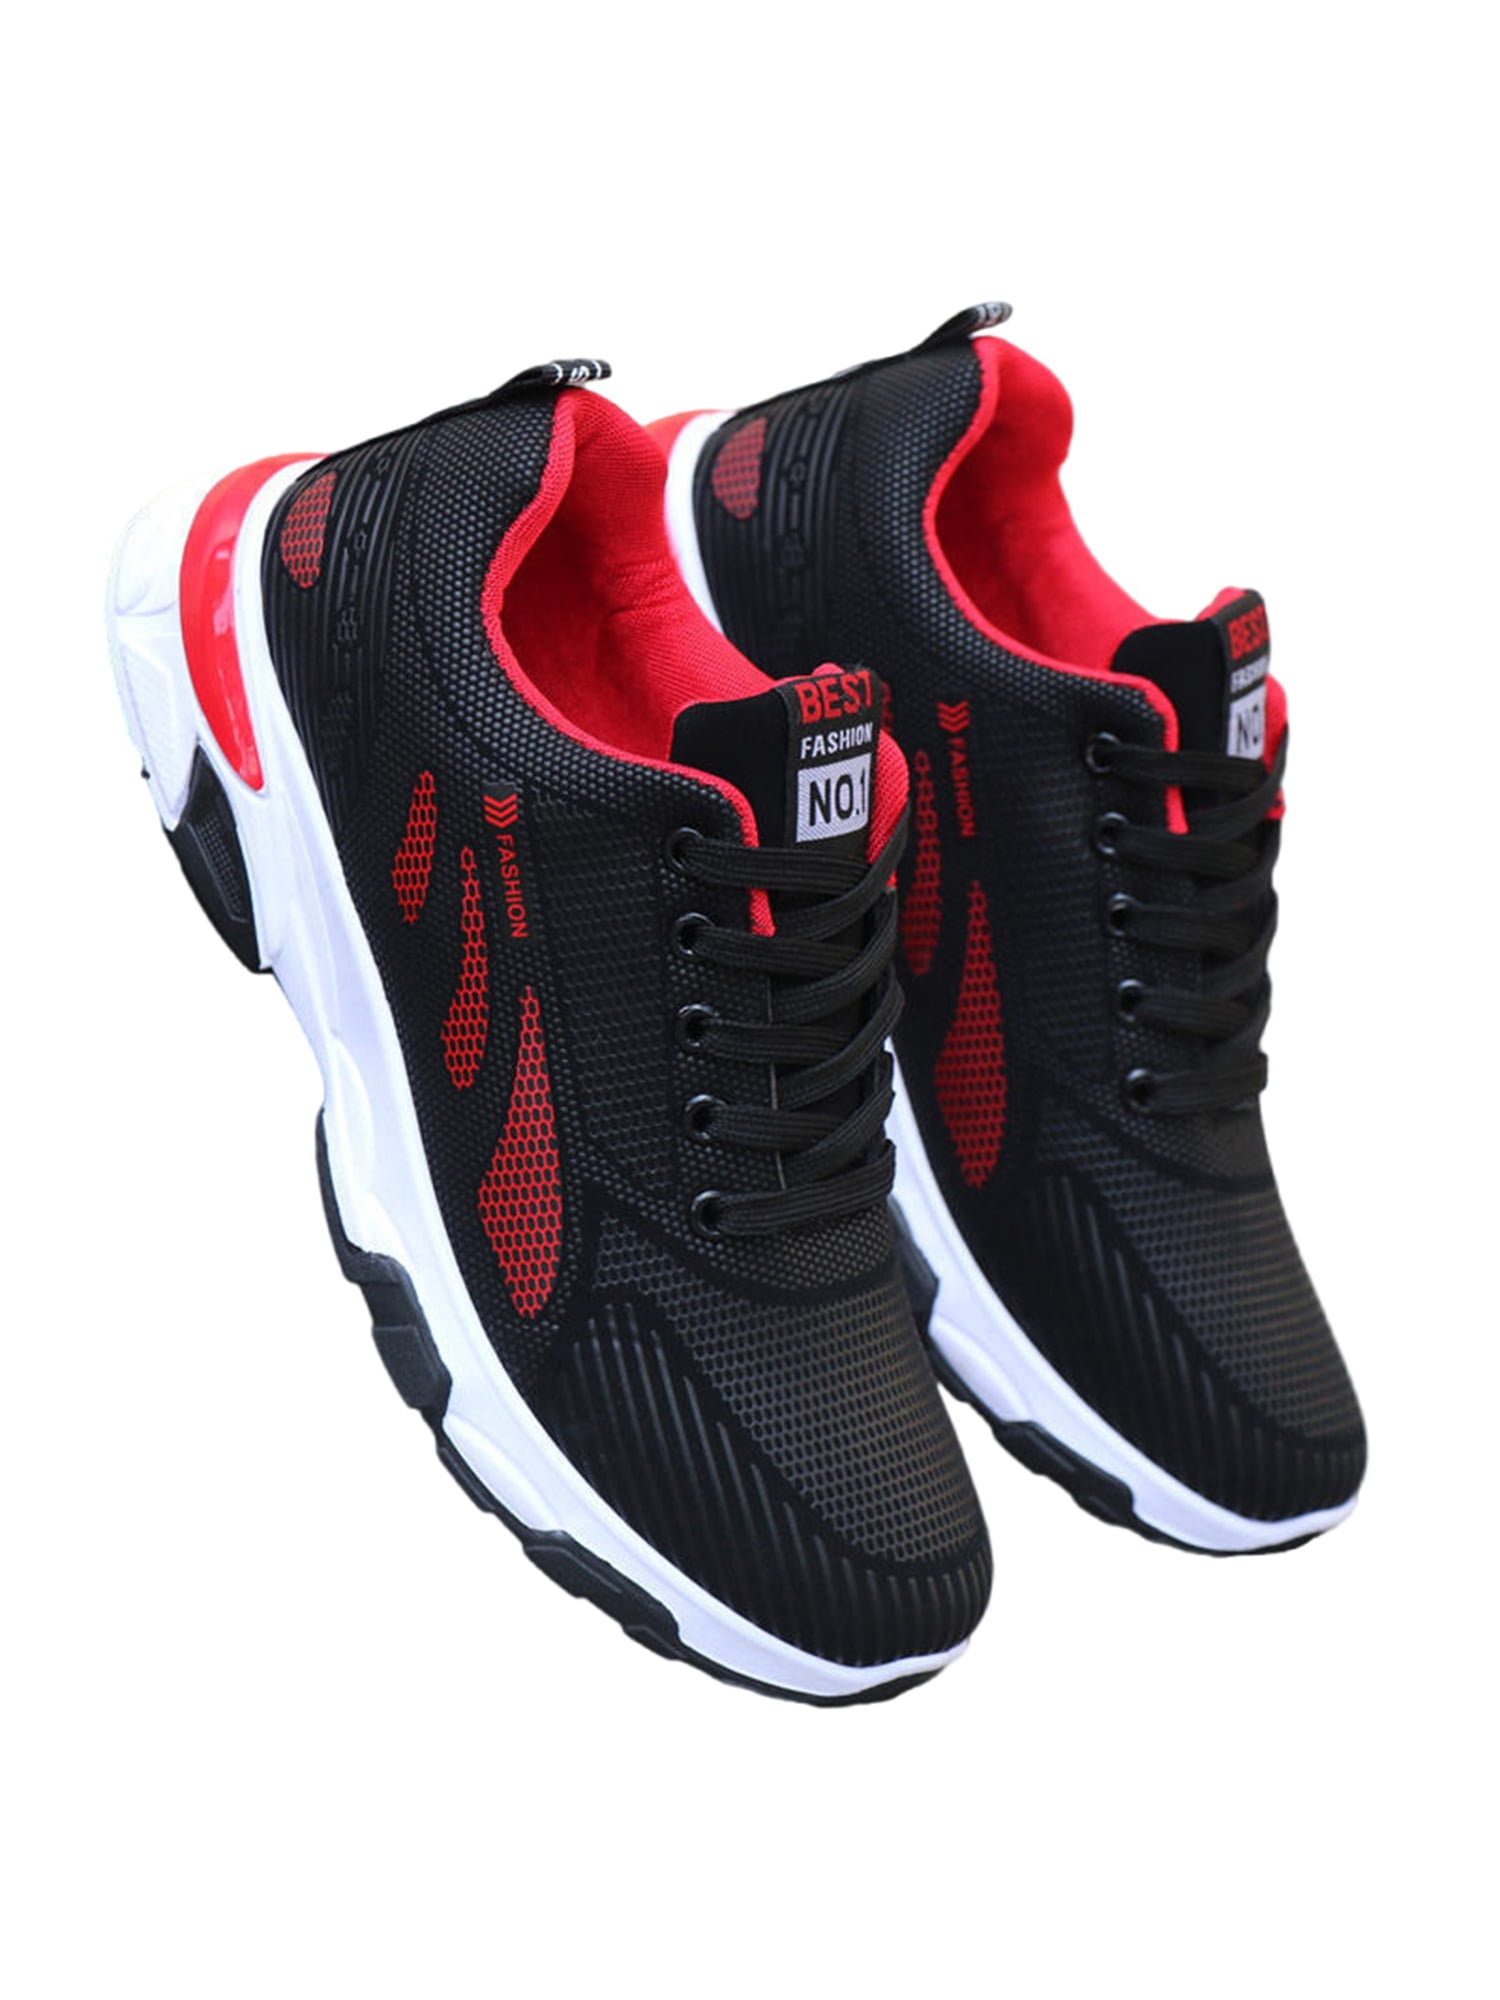 Stylish Athletic Shoes for Men with Comfortable Knit Fabric Upper and ...